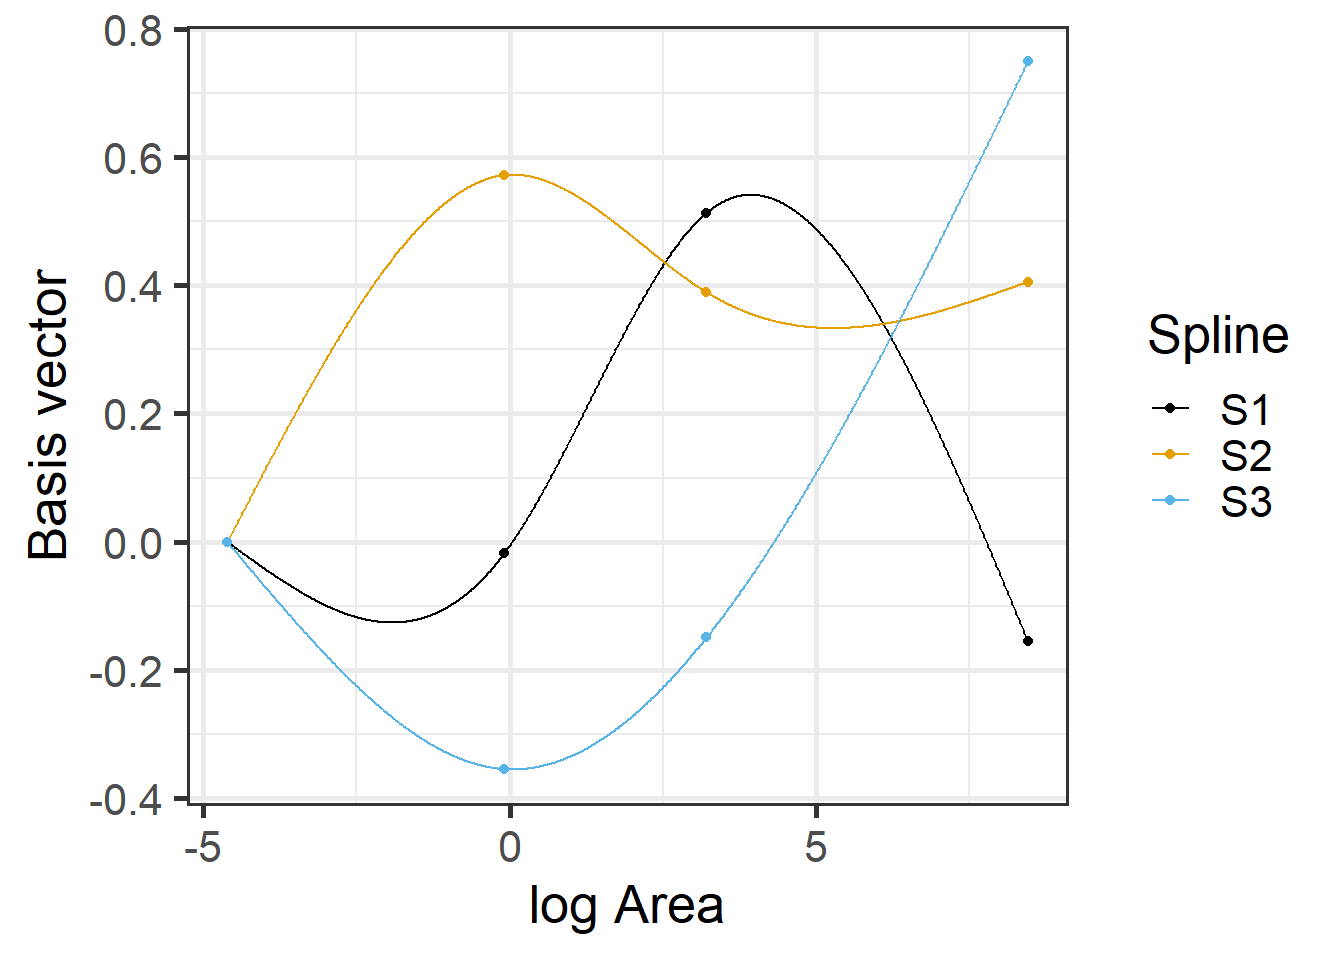 Basis vectors used in the fitting of the natural cubic regression spline model relating plant species richness to log(Area) for 29 islands in the Galapagos Islands archipelago. Data are from (M. P. Johnson & Raven, 1973). Dots indicate knot locations. Boundary knots were chosen using the minimum and maximum values in the data set. Interior knots were chosen using the 0.33 and 0.67 quantiles of the data. For more on these choices, see Section 4.5.4.